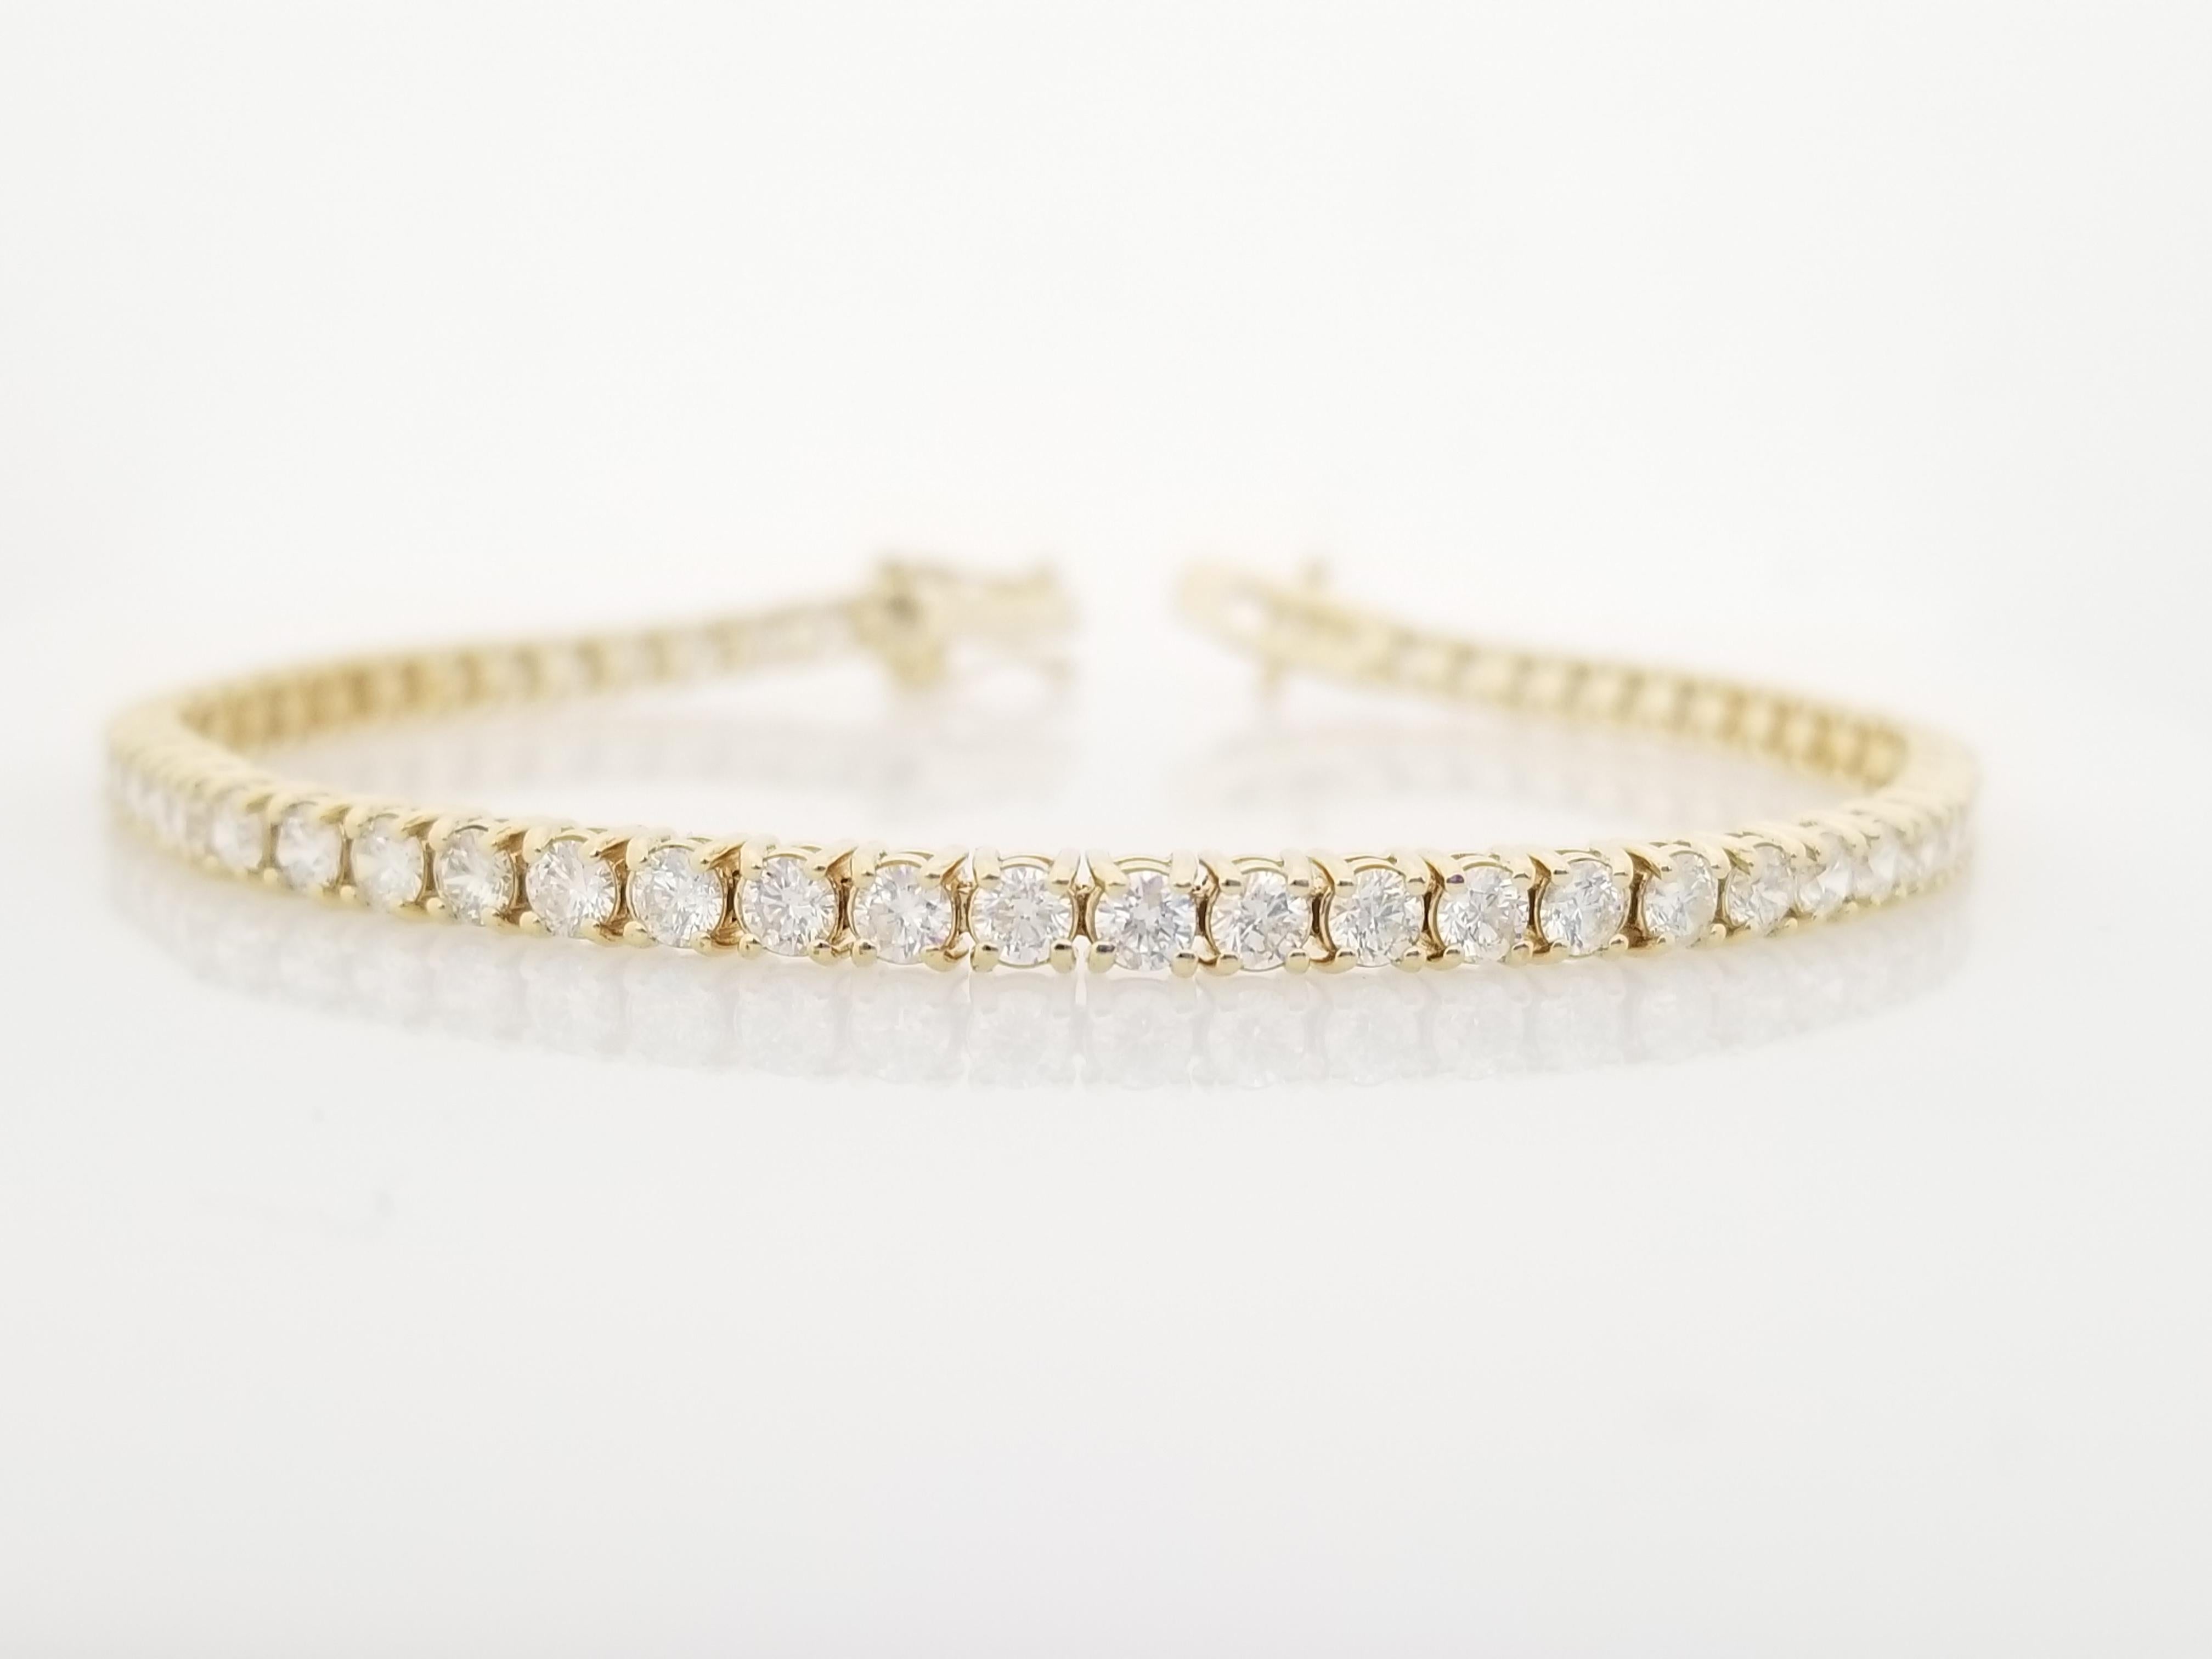 A quality tennis bracelet, round-brilliant cut diamonds. set on 14k yellow gold. each stone is set in a classic four-prong style for maximum light brilliance.
 
7 inch length.  
Average Color H
Average Clarity VS
3.2 mm wide.